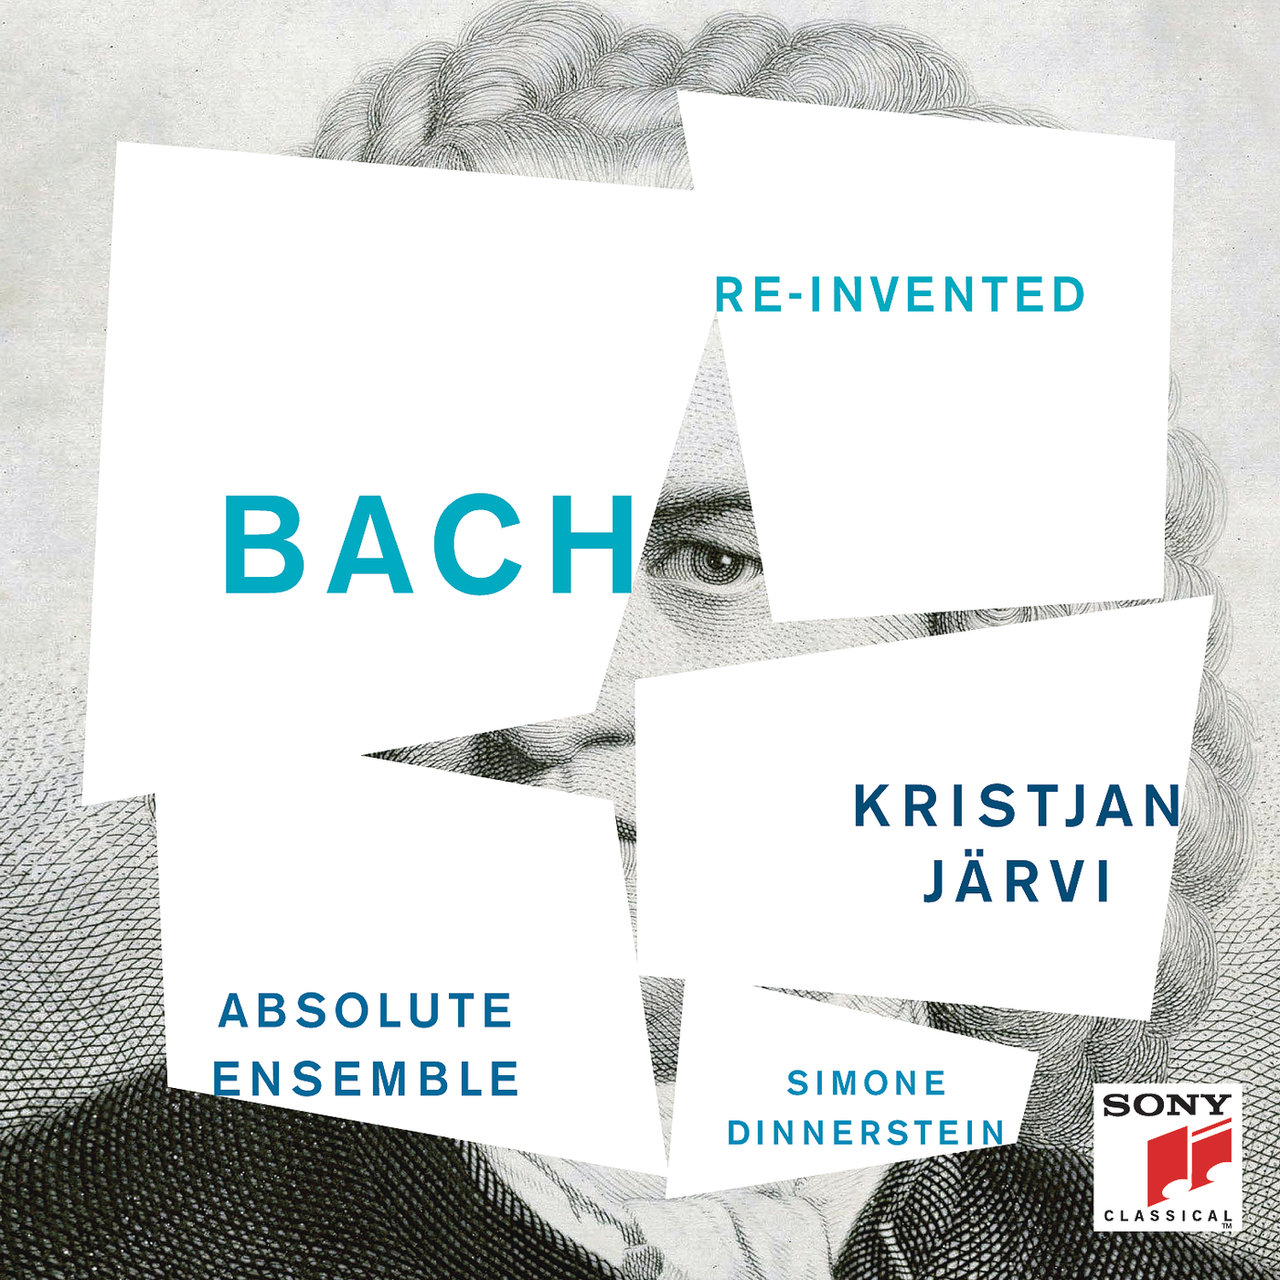 Kristjan Jarvi - Bach Re-invented (Contemporary, classical, electronic)